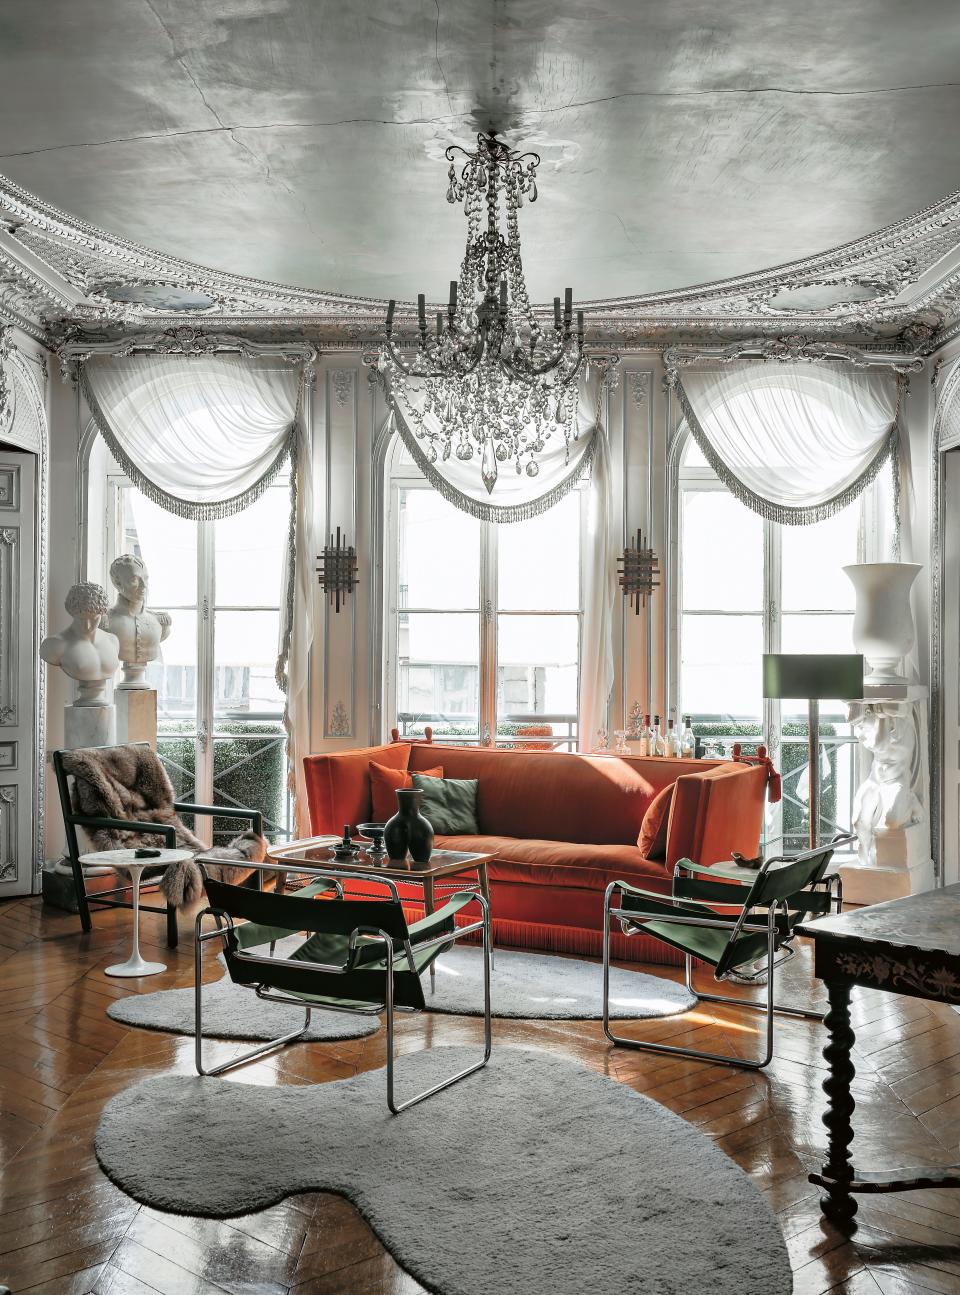 The Parisian apartment of Michael Coorengel and Jean-Pierre Calvagrac blends classical details and a modern aesthetic. In the living room, a fur-draped Mallet-Stevens chair sits beside a silk velvet sofa by Jansen and Breuer Wassily chairs reupholstered in green duchess satin.